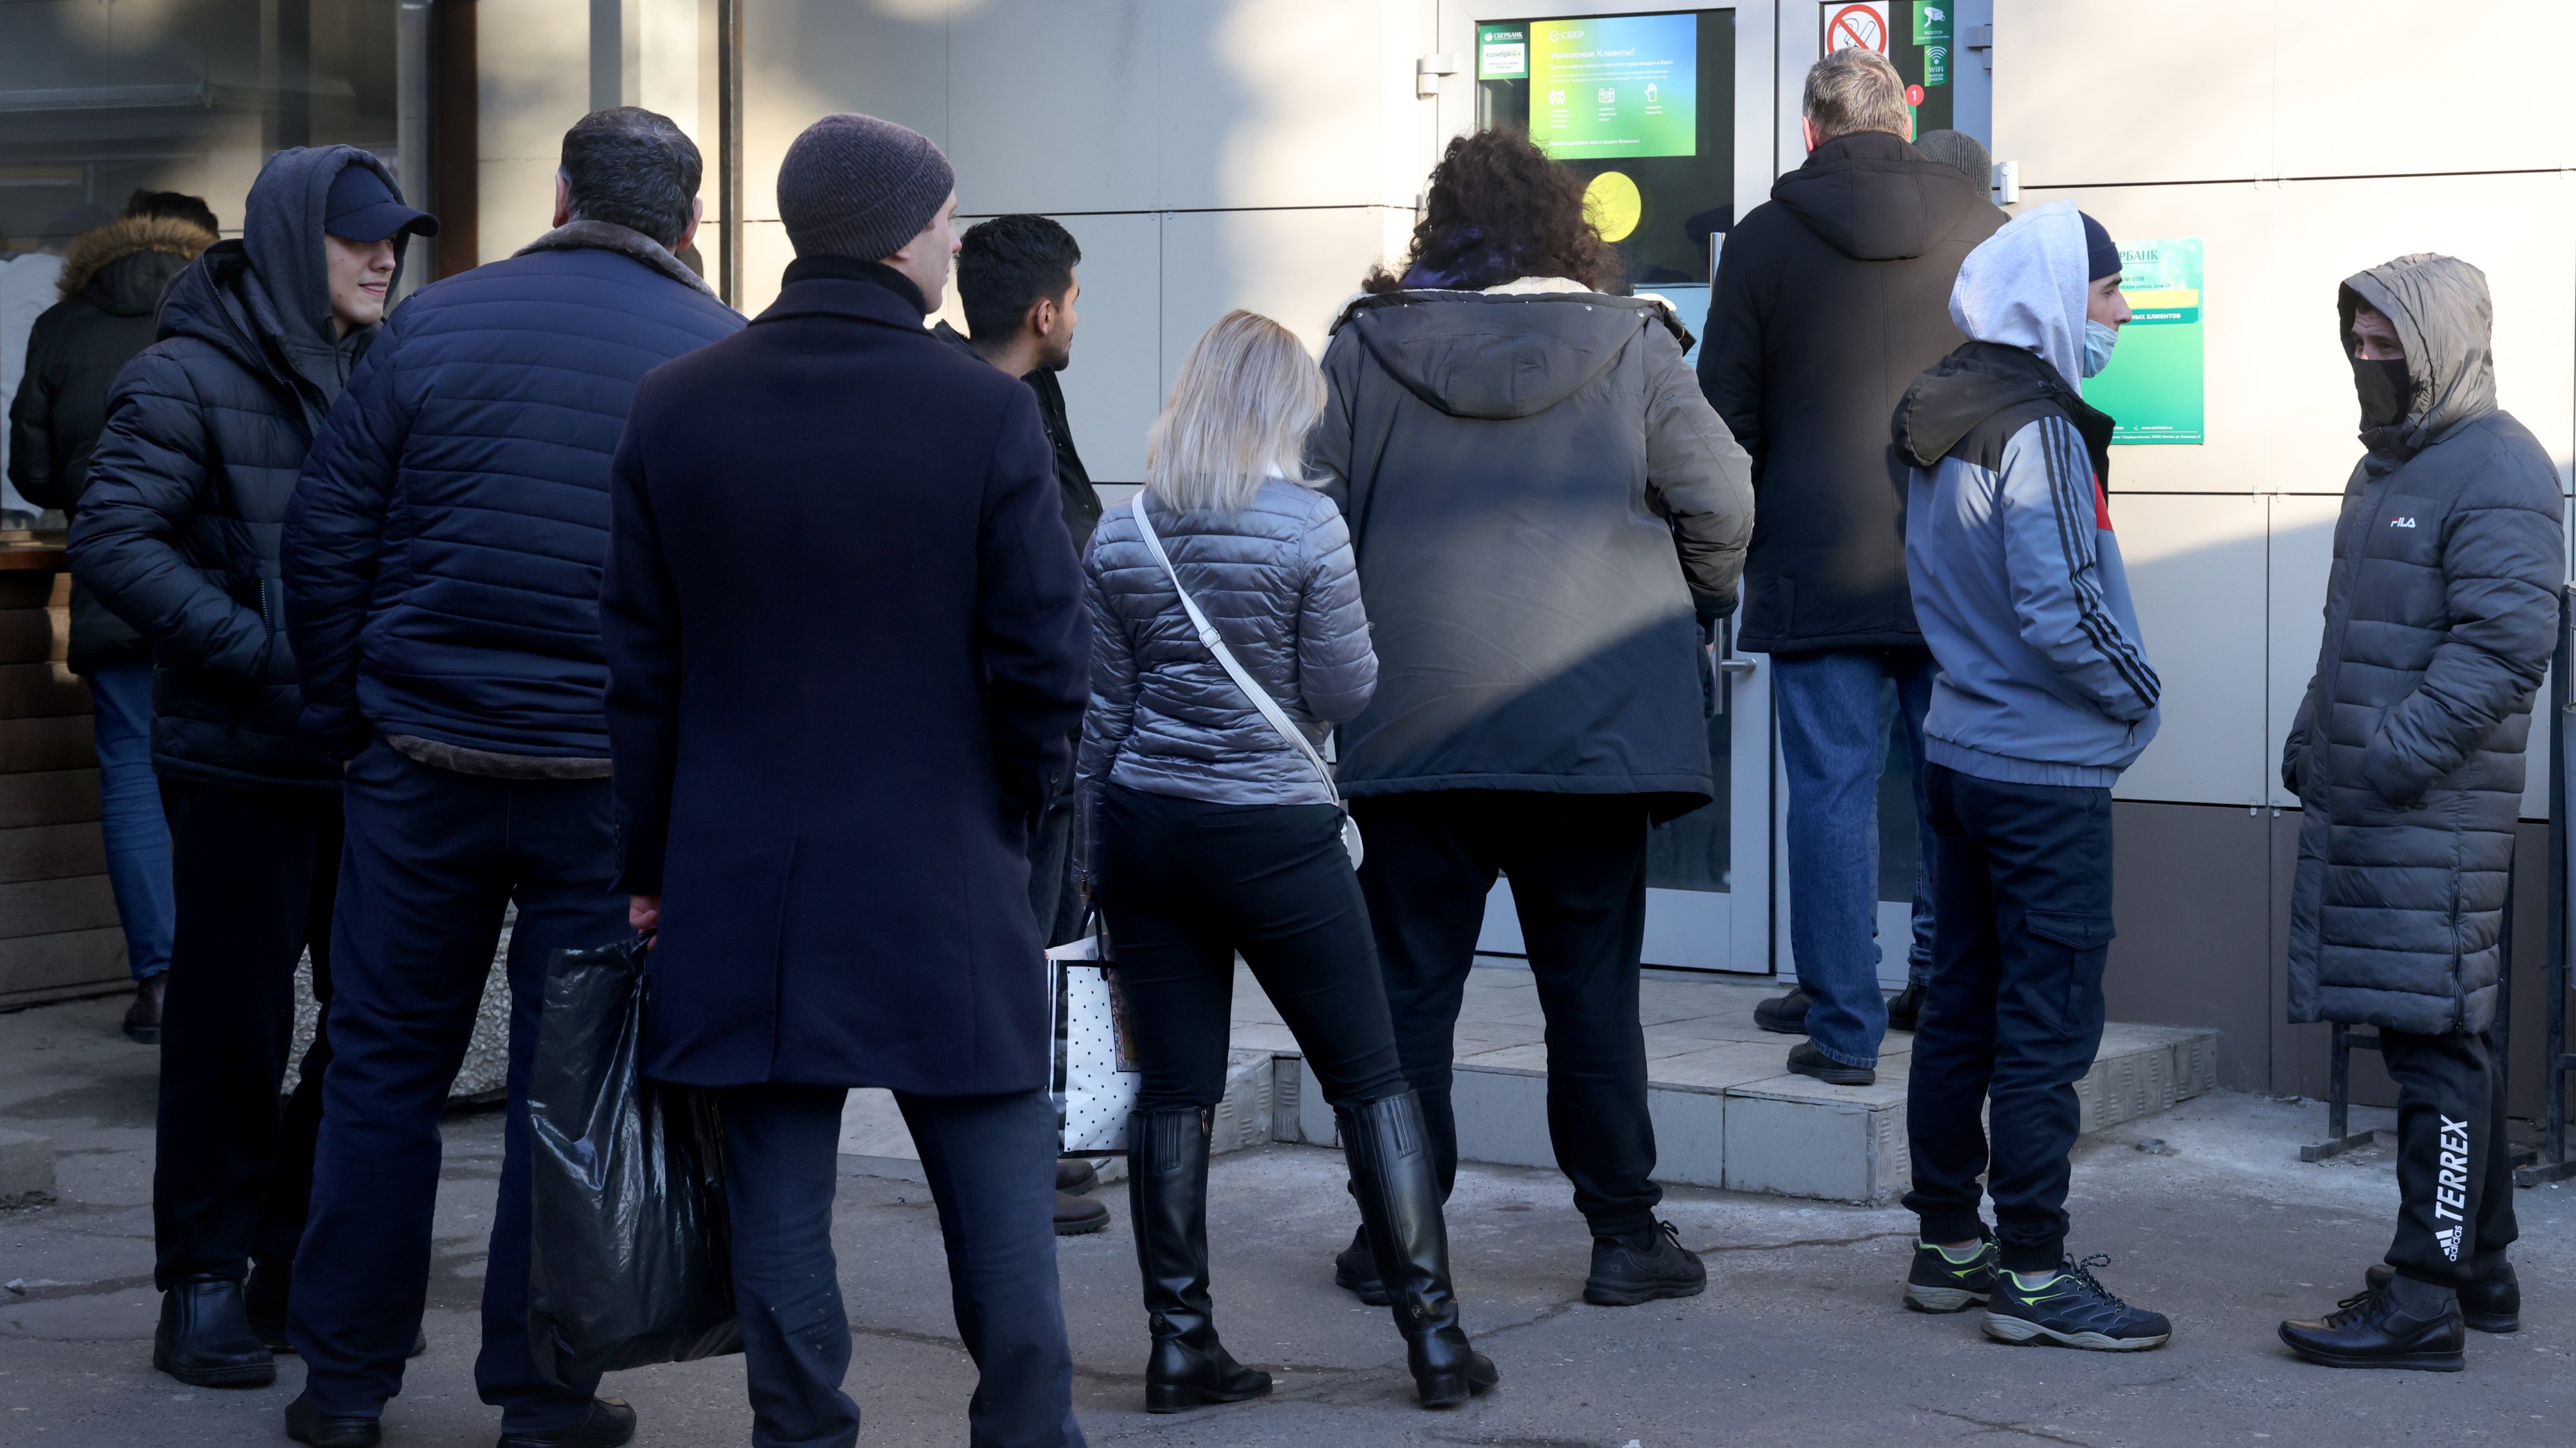 Queue at Sberbank branch in Moscow